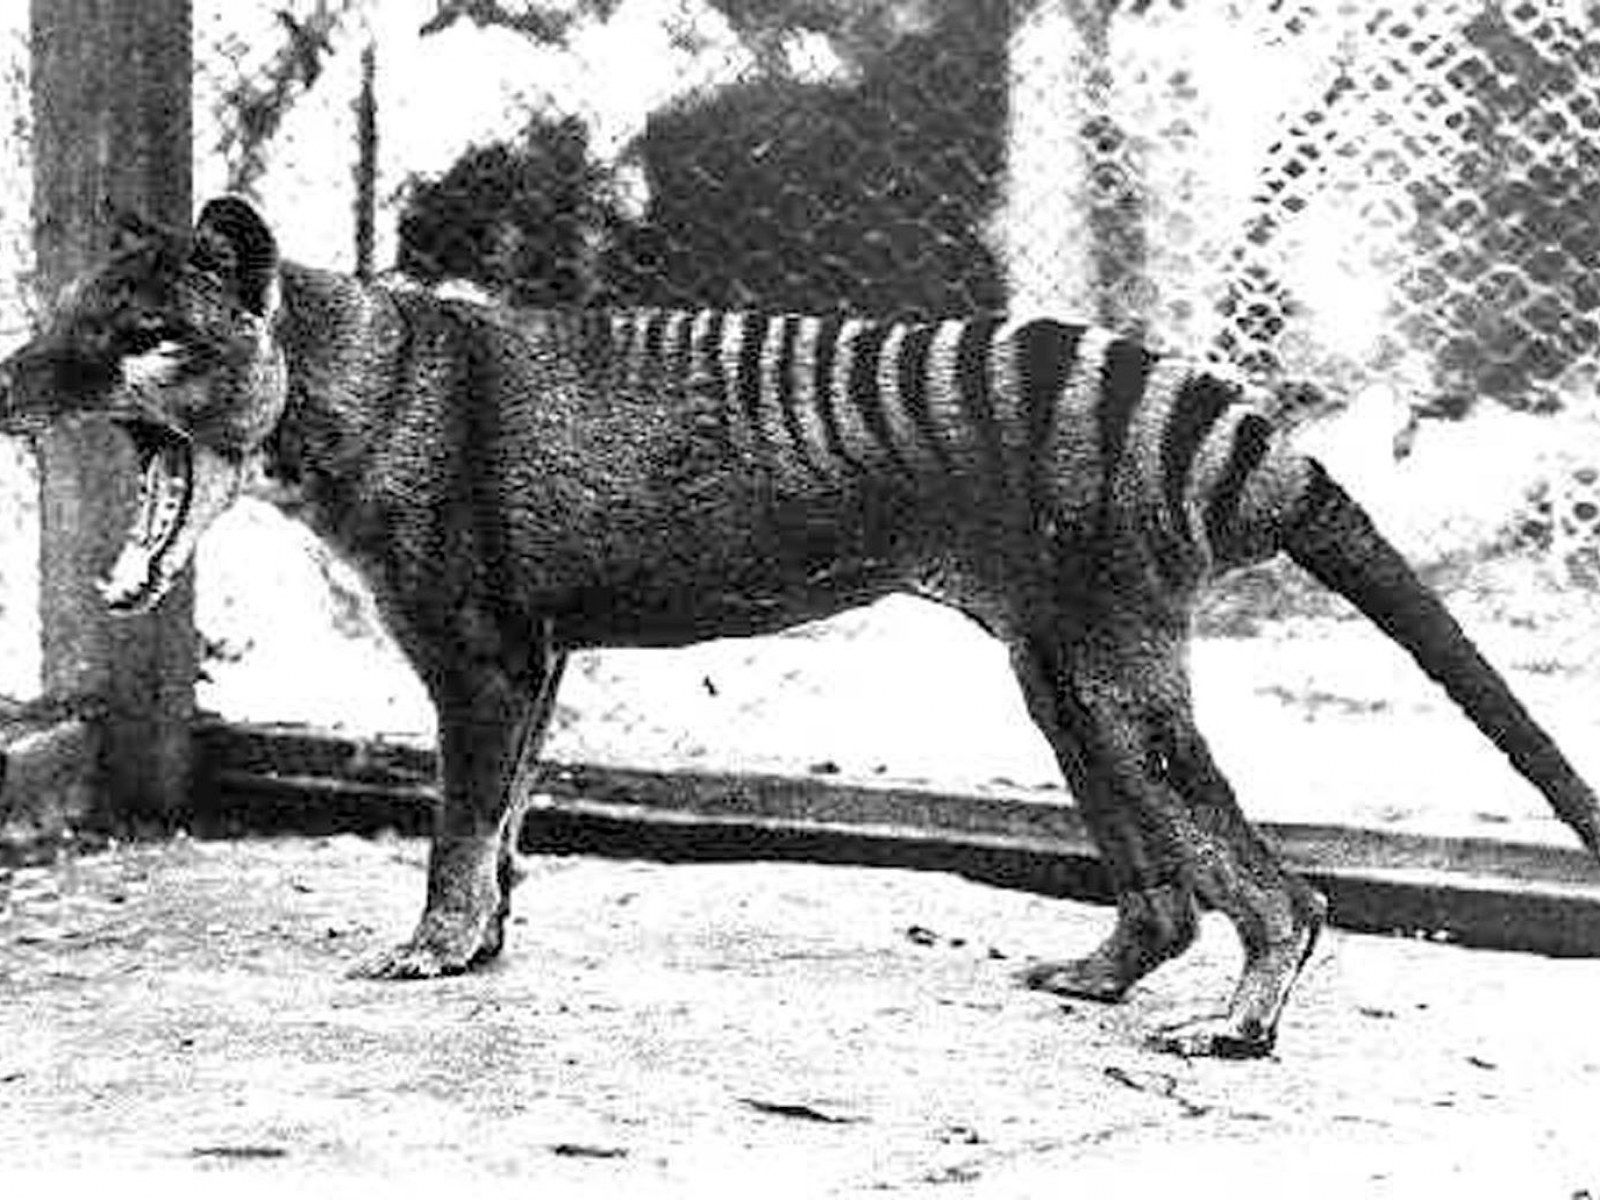 Watch Last Known Footage of Extinct Tasmanian Tiger From 1935 That Was Just Rediscovered